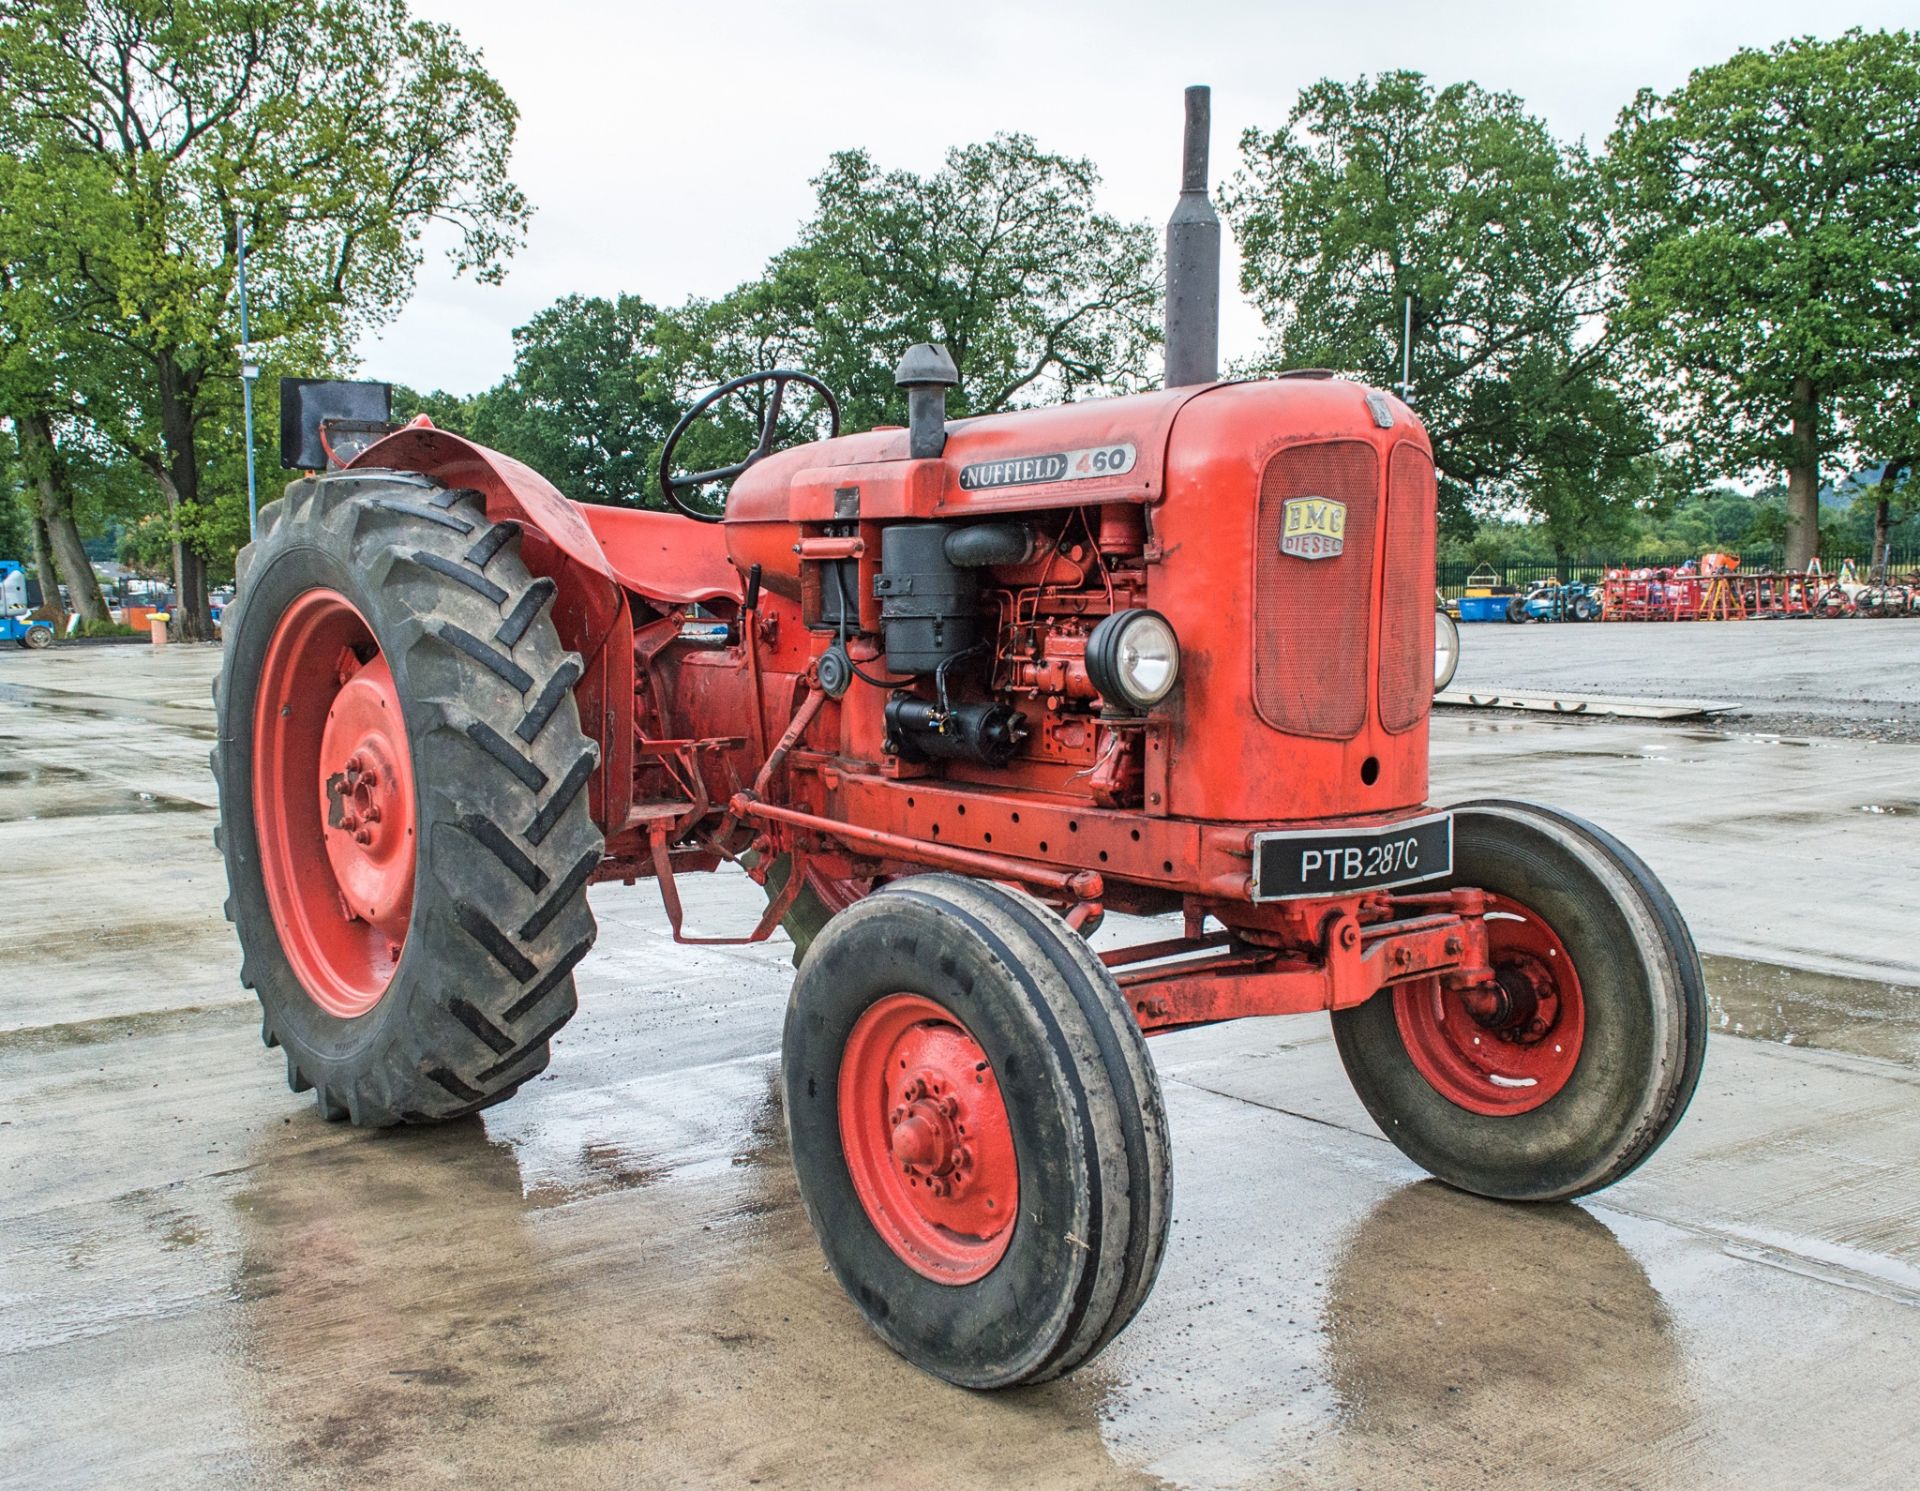 Nuffield 460 2 wheel drive diesel driven tractor  Reg Number: PTB 287C  S/N: 60B 1500 57042 - Image 2 of 16